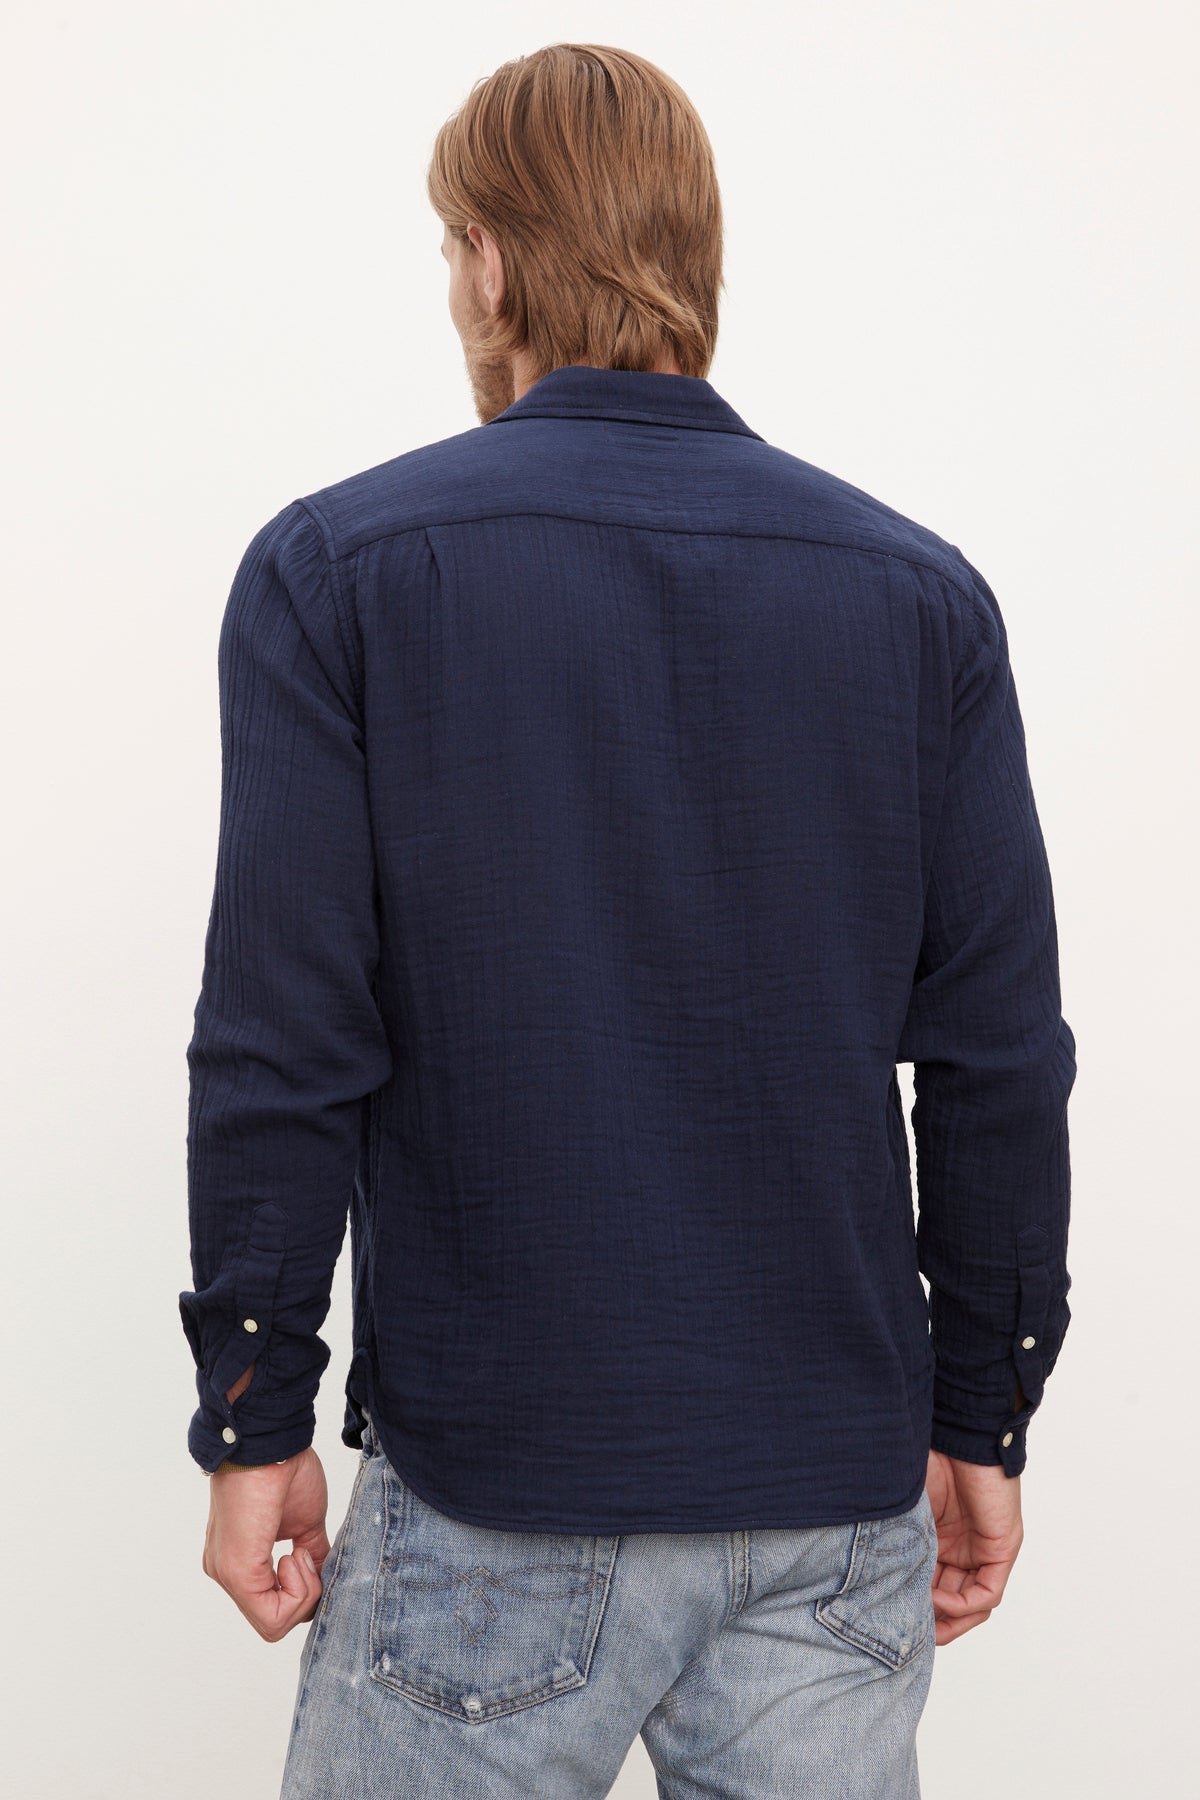   The back view of a man wearing casual jeans and an ELTON BUTTON-UP SHIRT by Velvet by Graham & Spencer. 